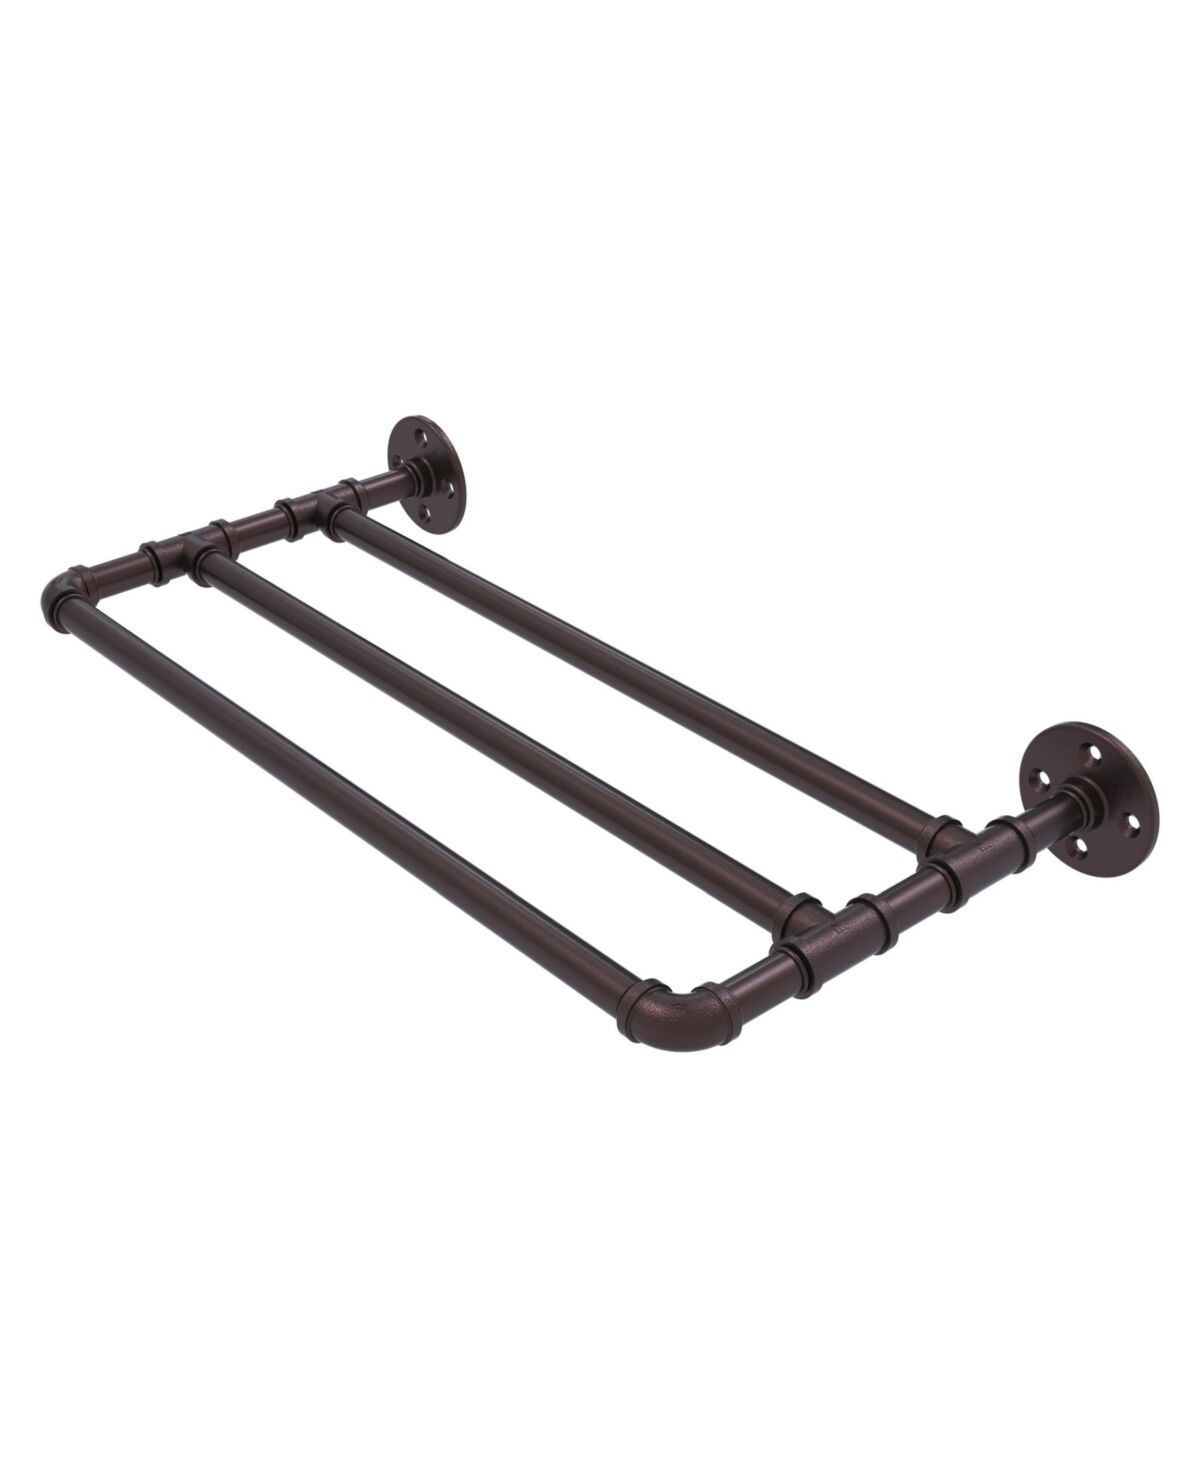 Allied Pipeline Collection 30 Inch Wall Mounted Towel Shelf - Antique bronze